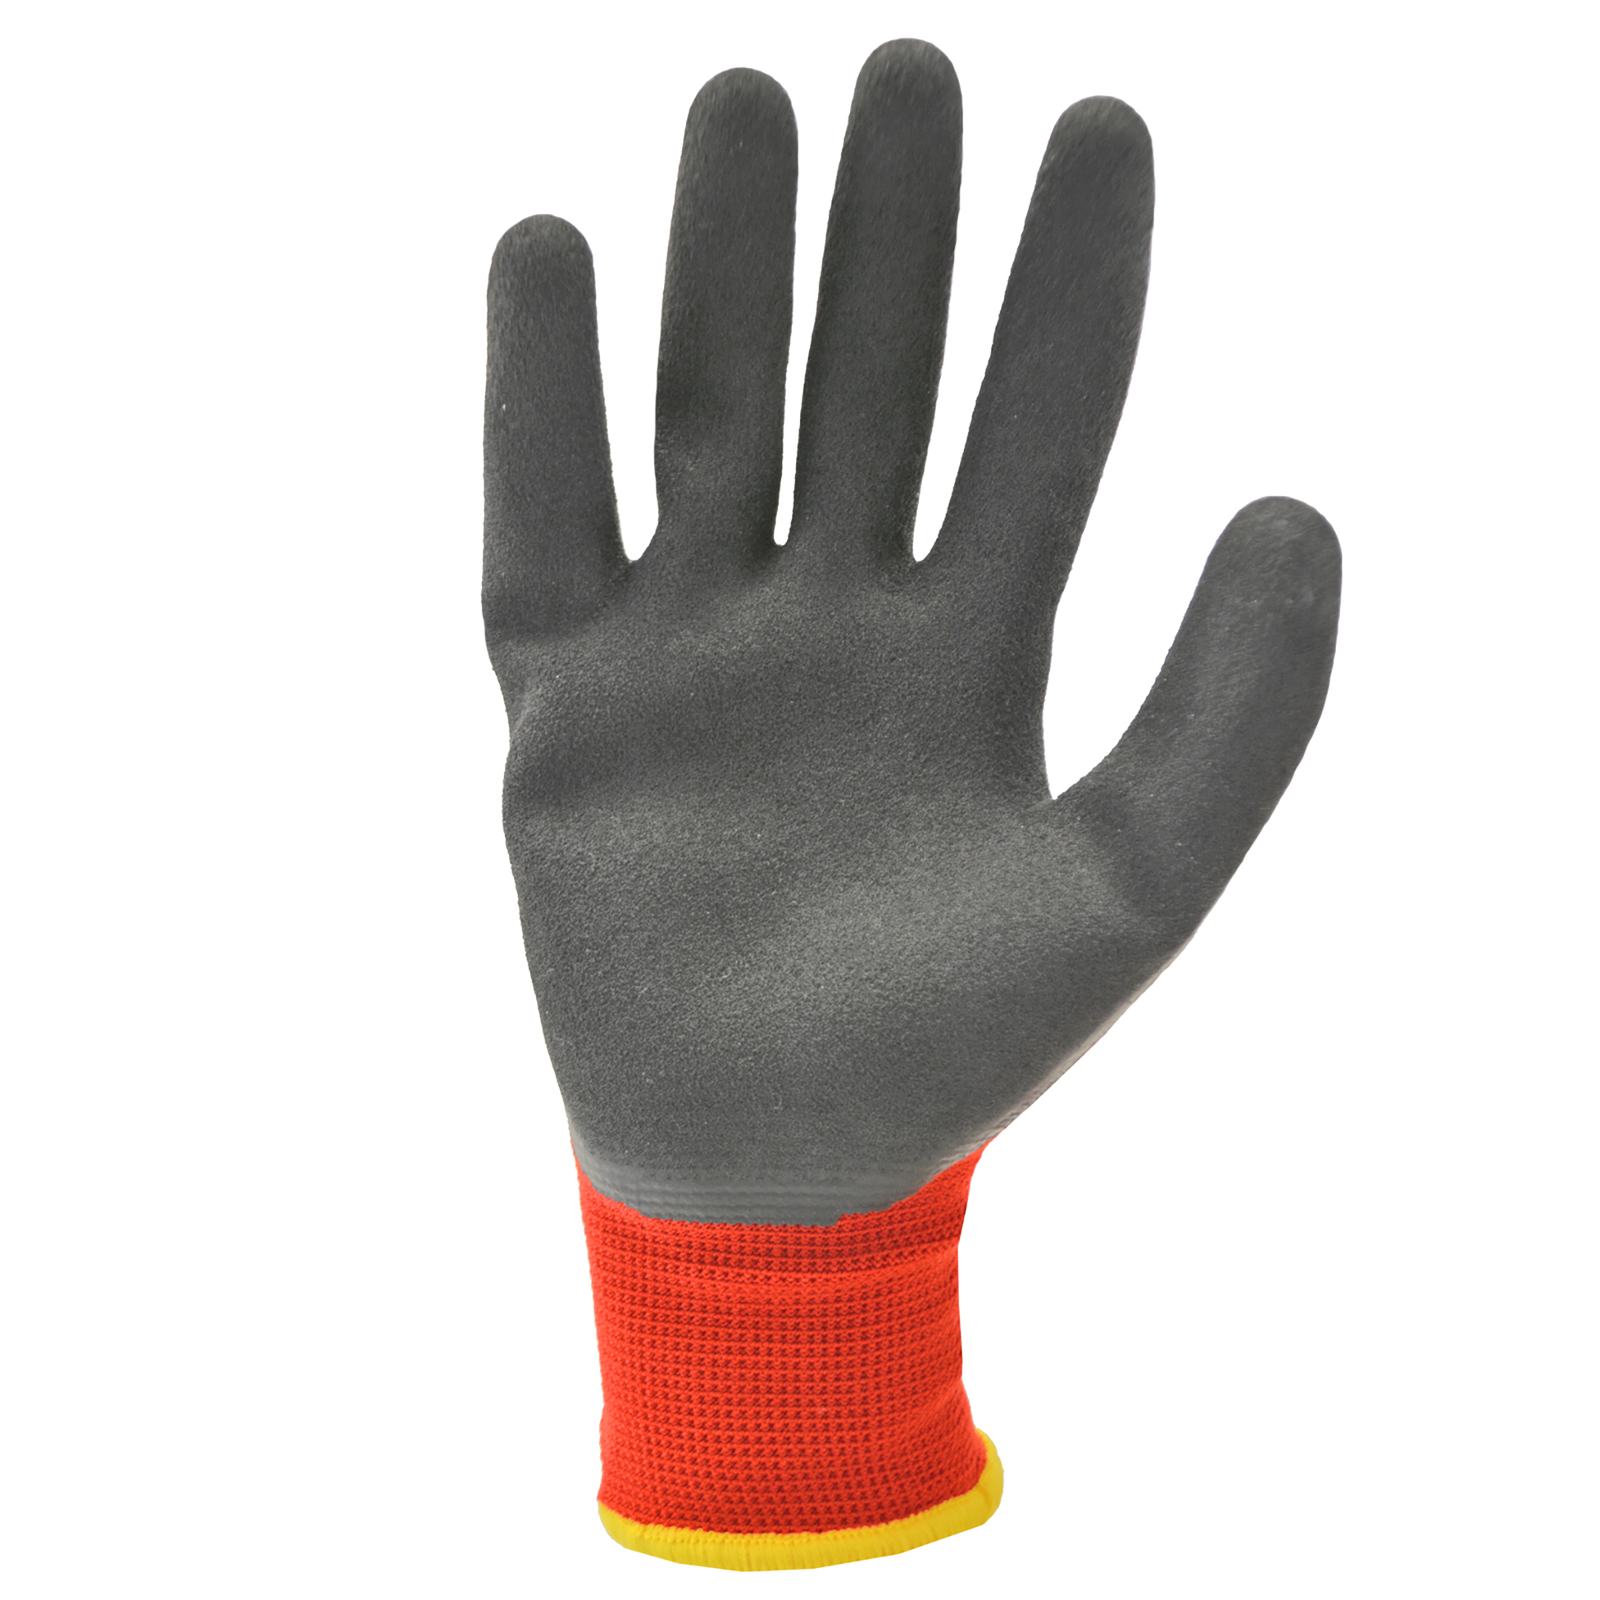 Palm of red and back safety work gloves with latex dipped palms